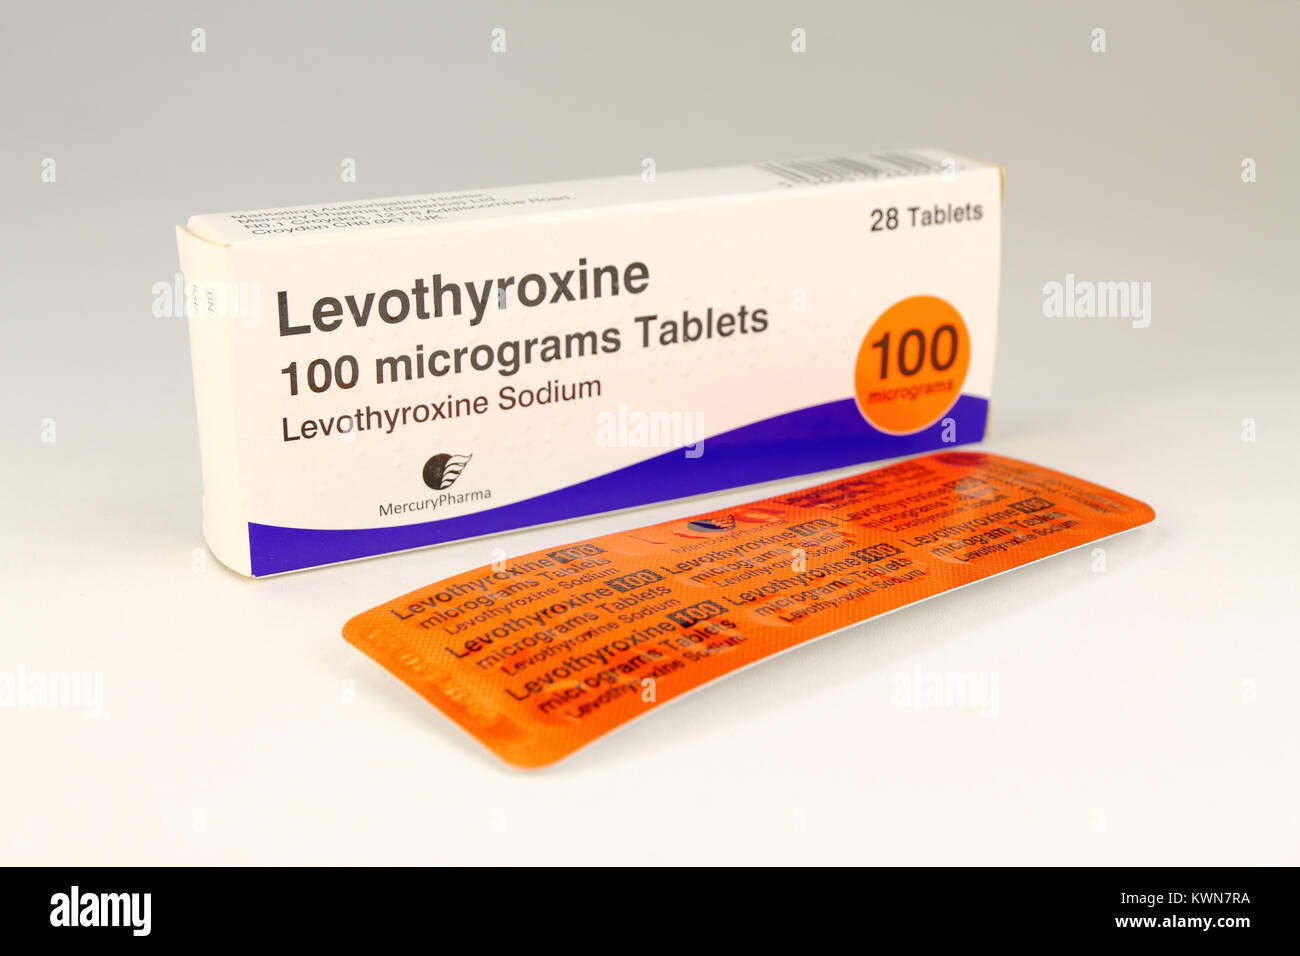 Levothyroxine, trade name of a medicinal drug for treatment of underactive thyroid gland Stock Photo